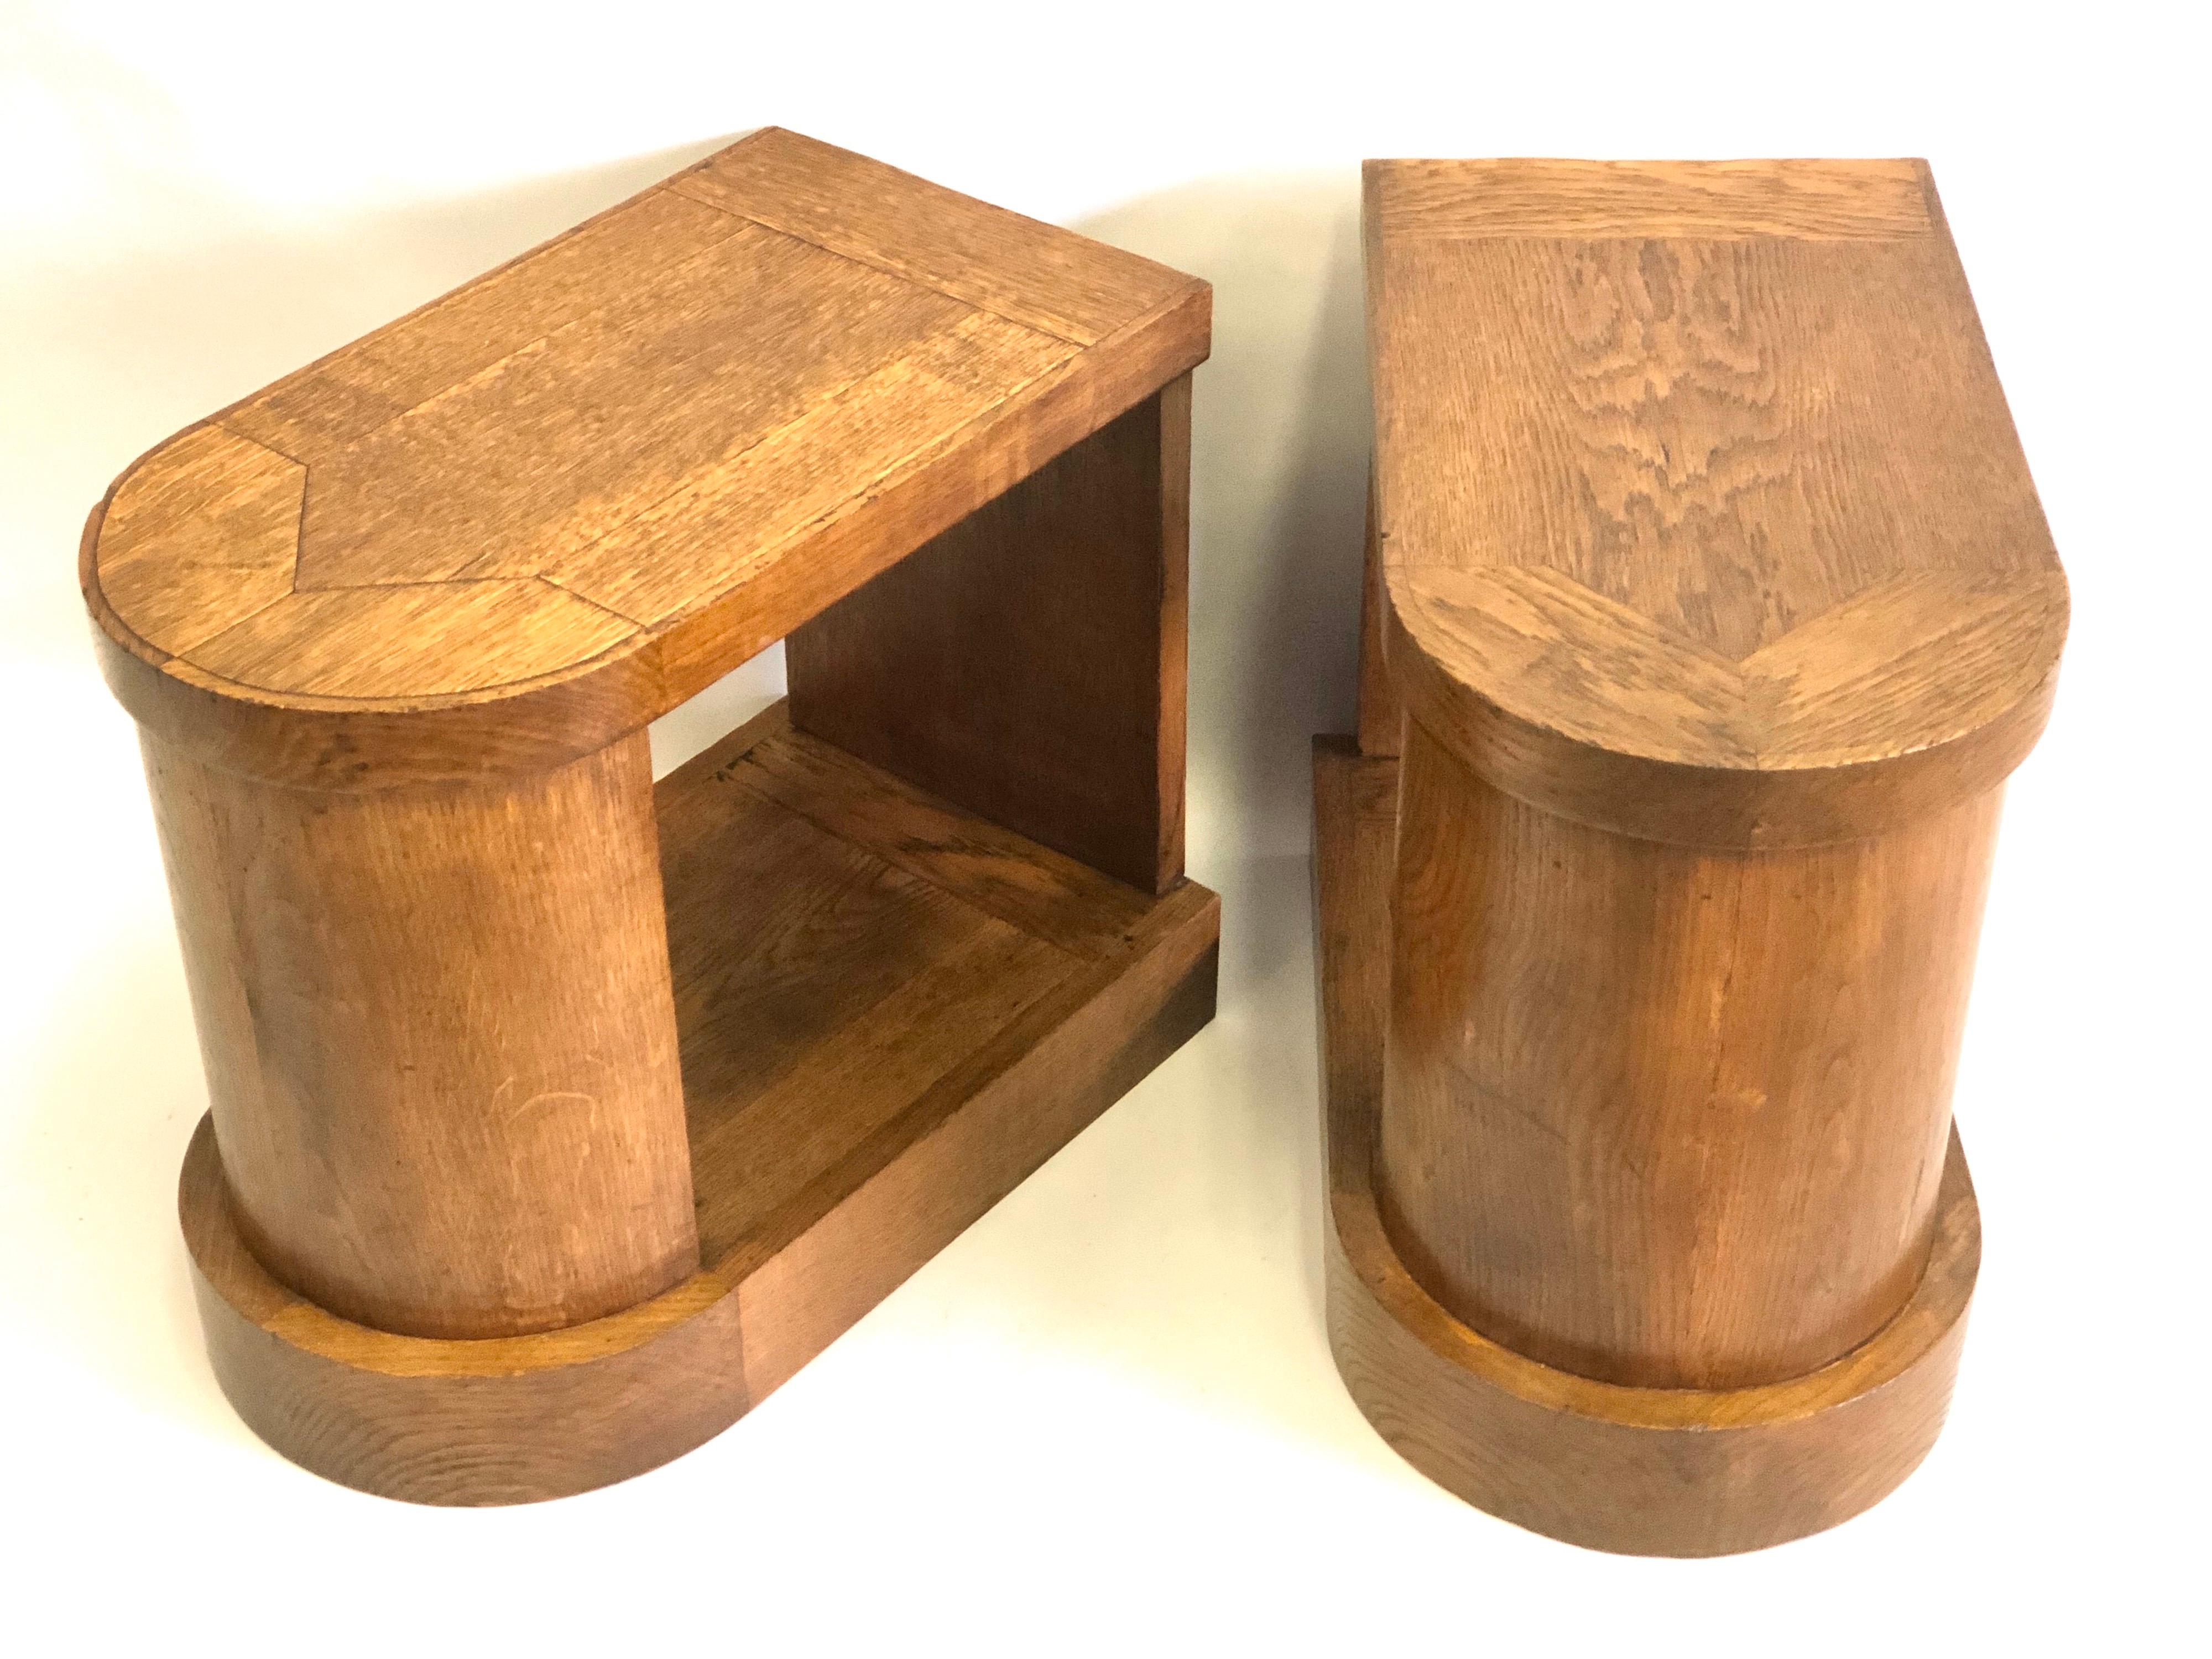 Pair of handmade French Mid-Century Modern oak nightstands or side tables or end tables in the style of Pierre Legrain, circa 1925-1930.

The pieces have a sensuous French Art Deco influence with their smooth and flowing lines. They feature